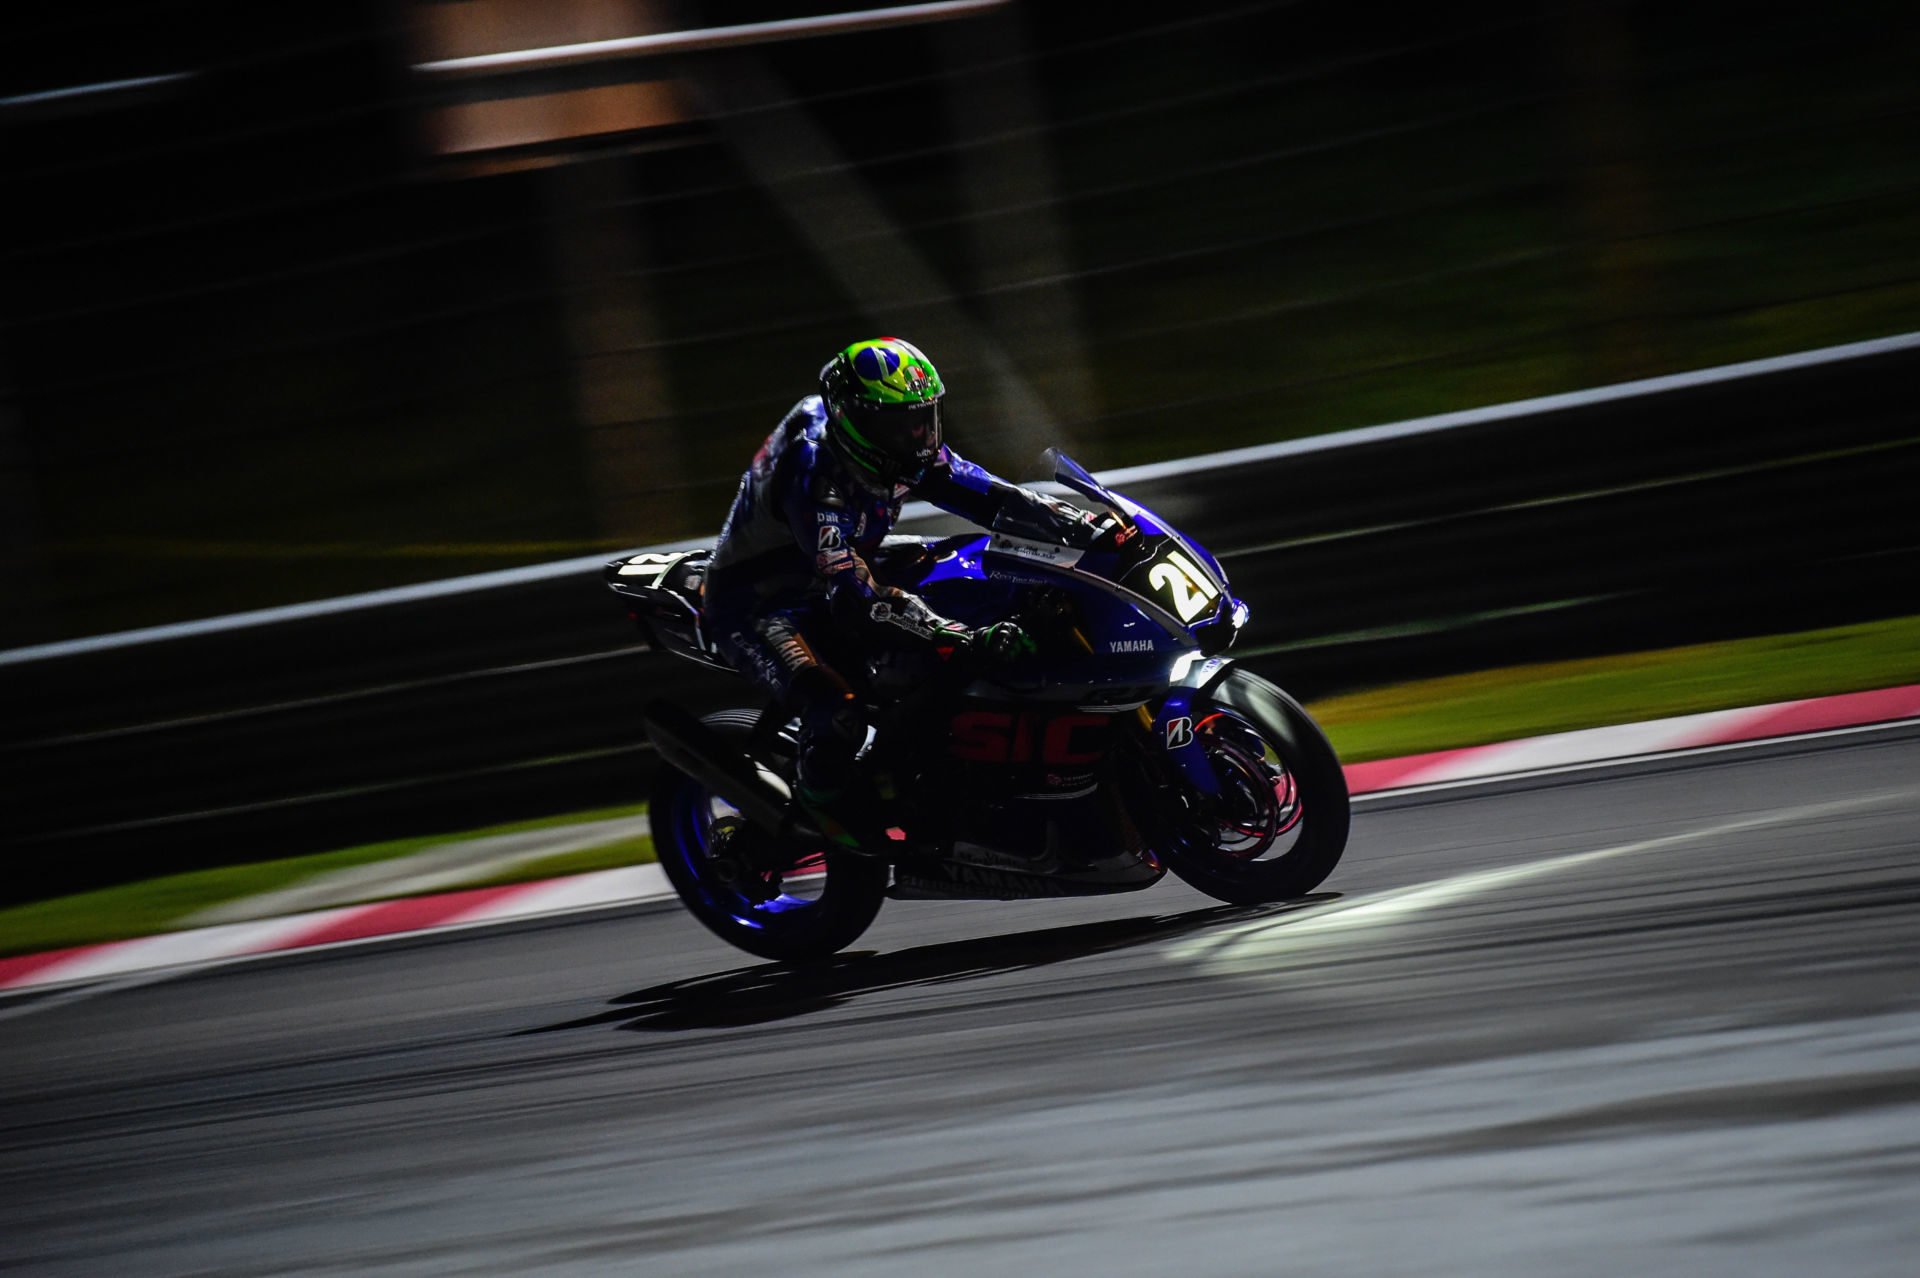 Franco Morbidelli (21) in action on the Yamaha Sepang Racing YZF-R1 during the Top 10 Trial qualifying session at the 8 Hours of Sepang. Photo courtesy of Yamaha.